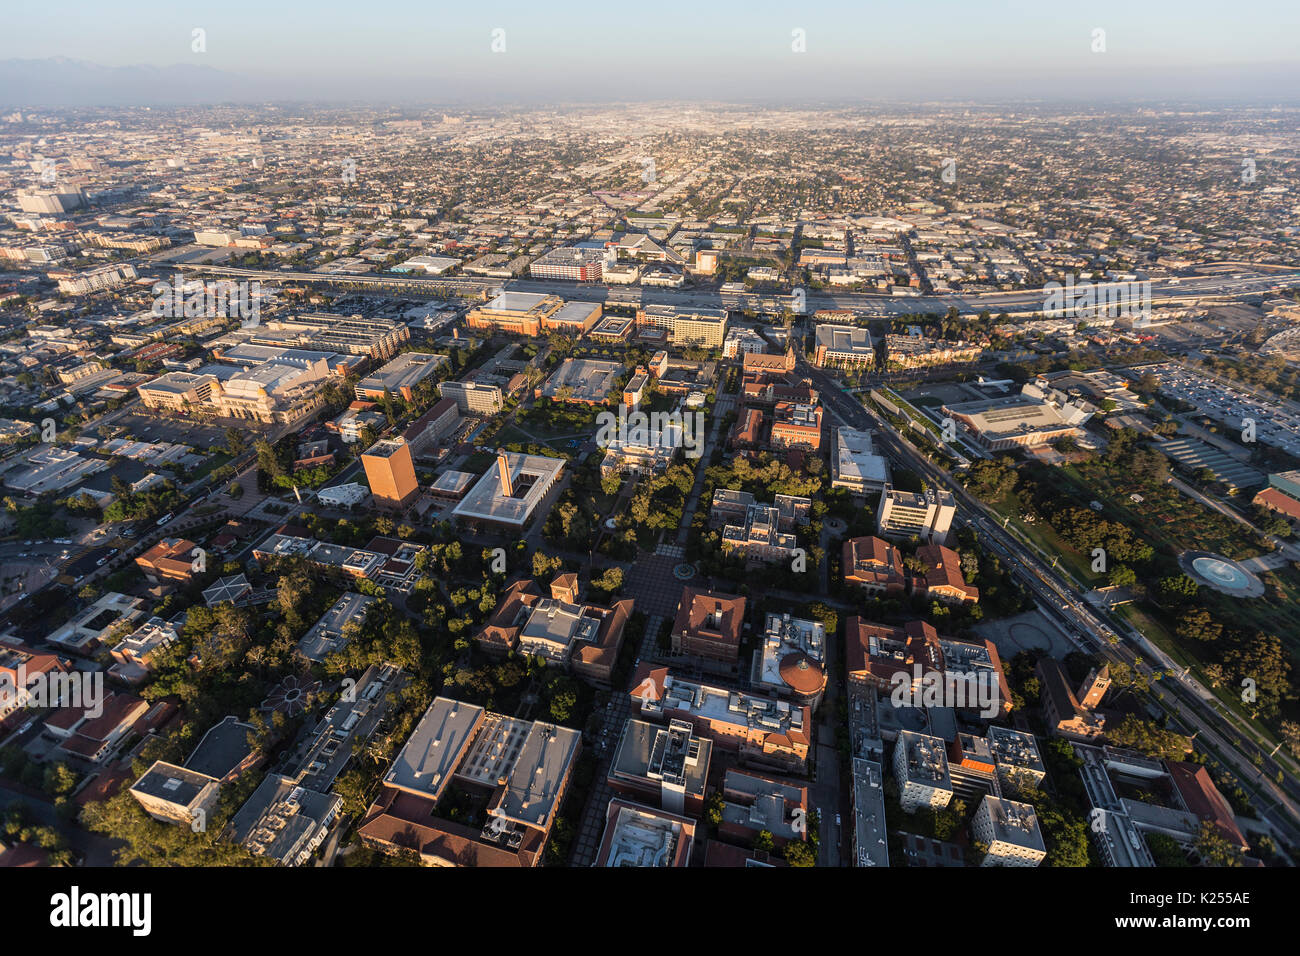 Aerial view of the University of Southern California campus and neighborhoods south of downtown Los Angeles. Stock Photo